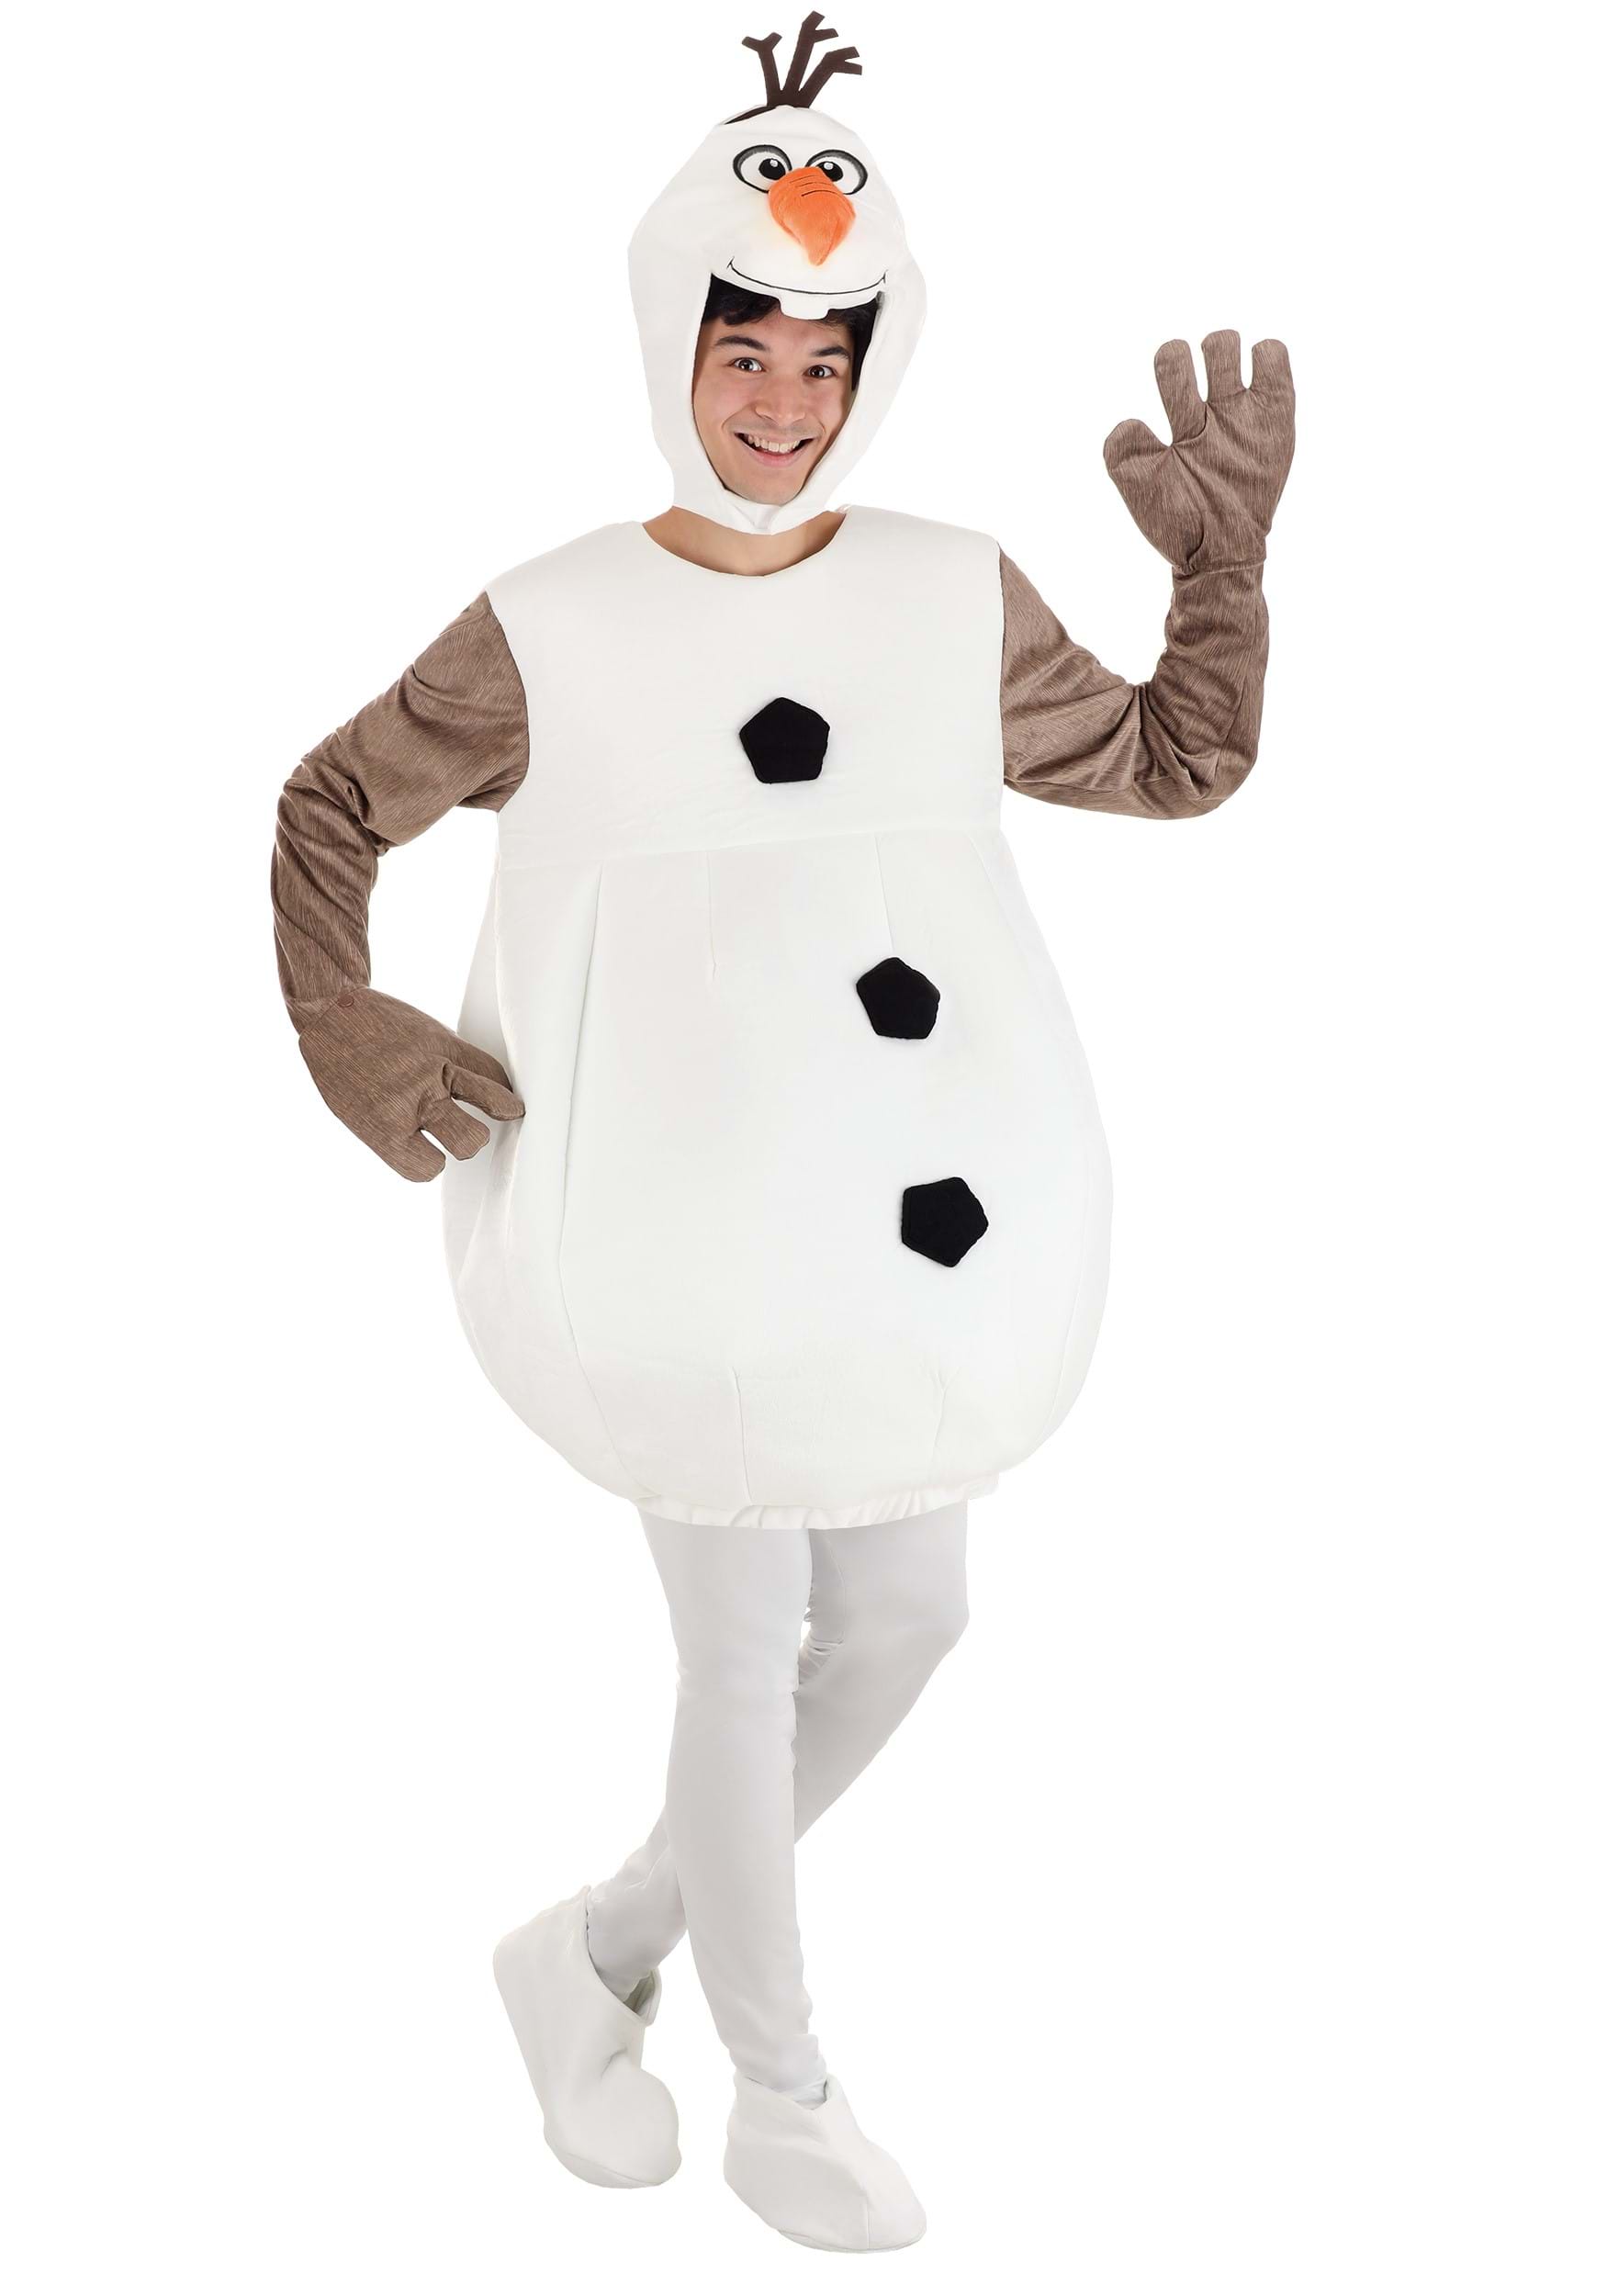 Photos - Fancy Dress FUN Costumes Frozen Olaf Costume for Adult's Orange/Brown/White